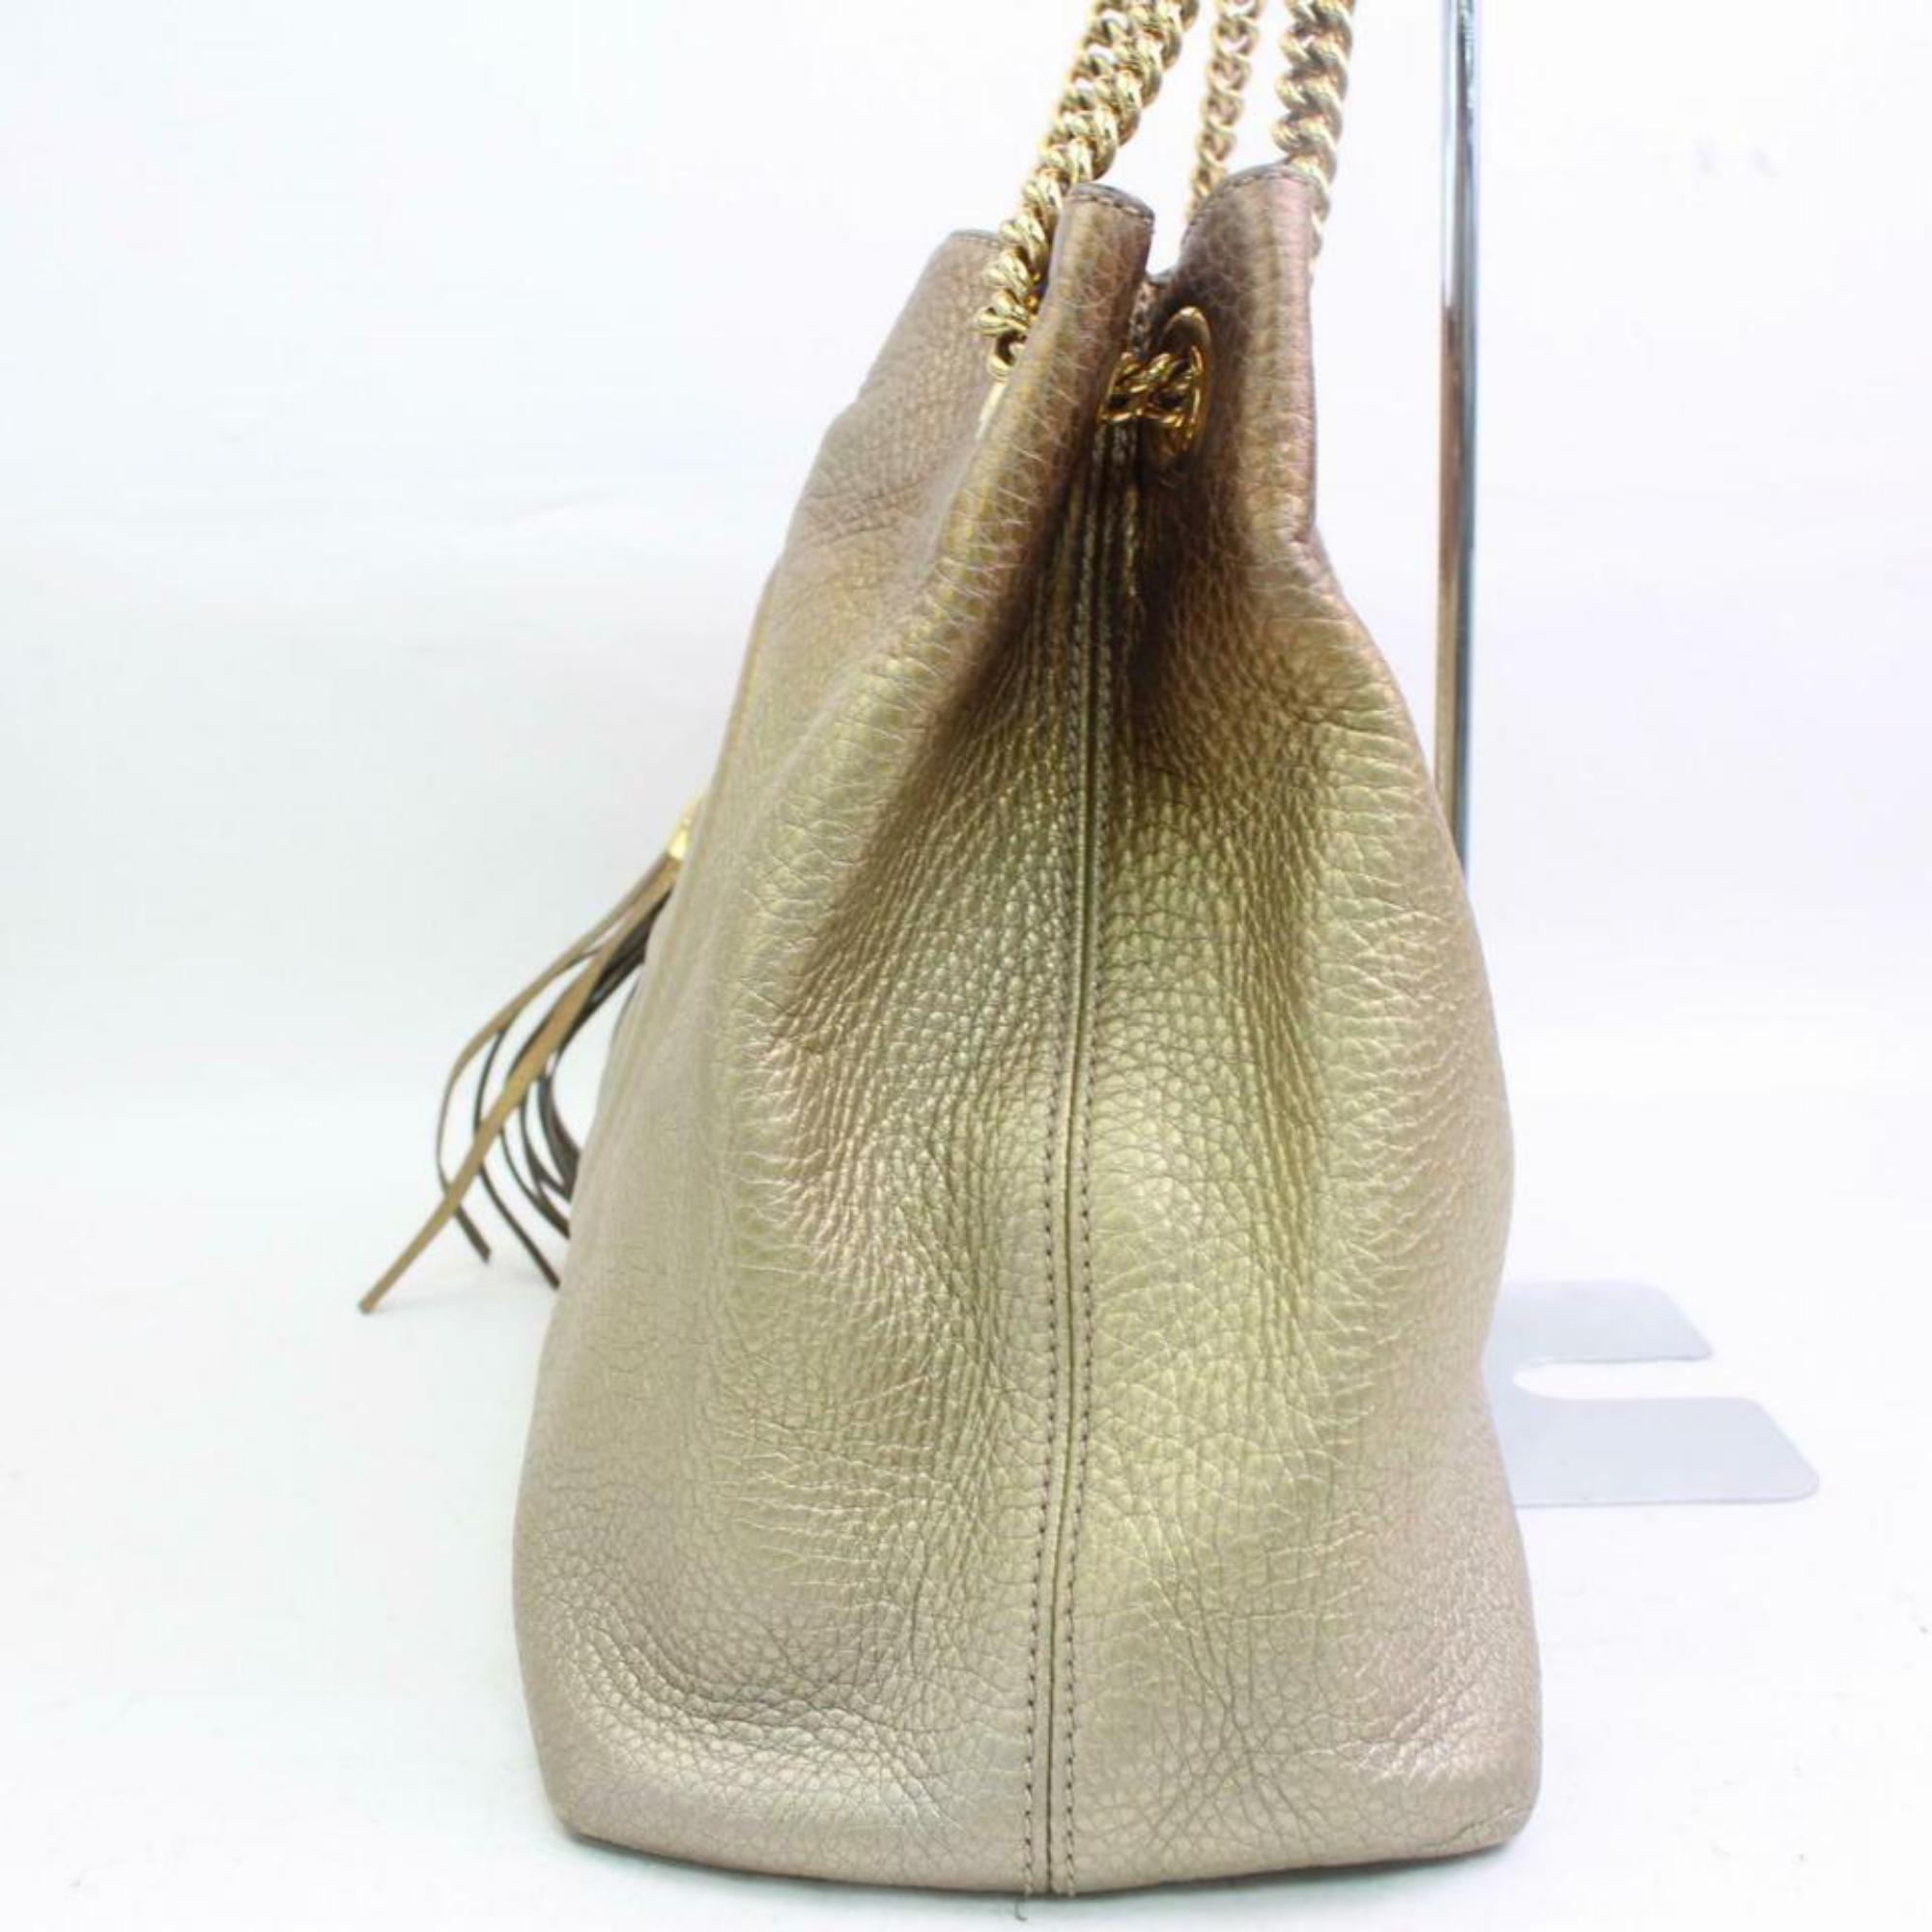 Gucci Ombre Soho Tassel Gold Chain Tote 870595 Beaige Leather Shoulder Bag For Sale 3